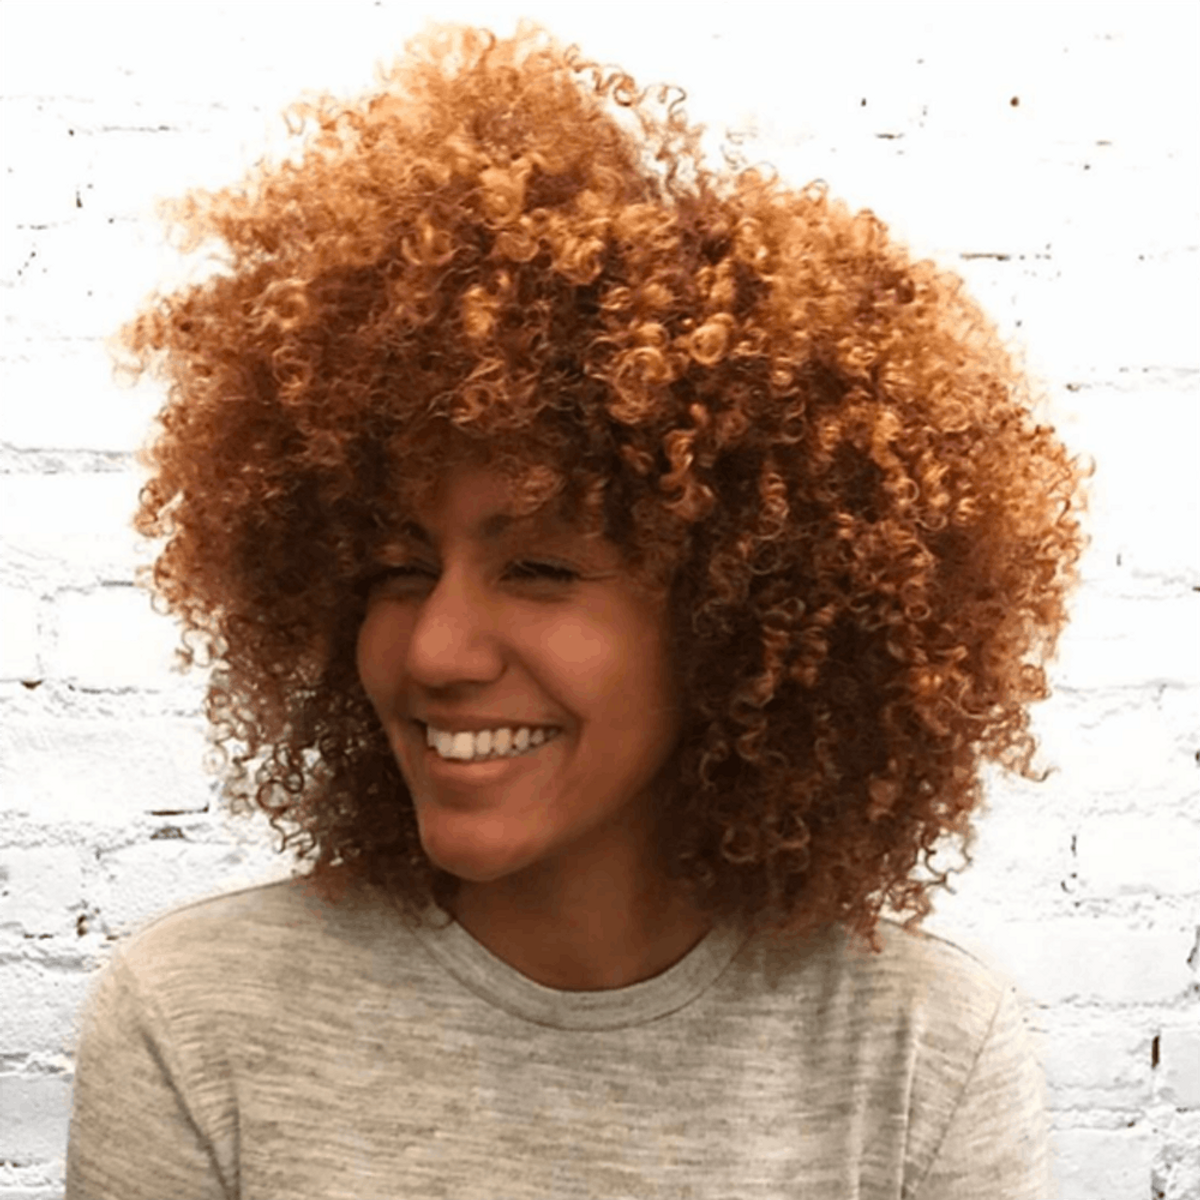 9 of the Best Caramel Hair Looks We Spotted This Season